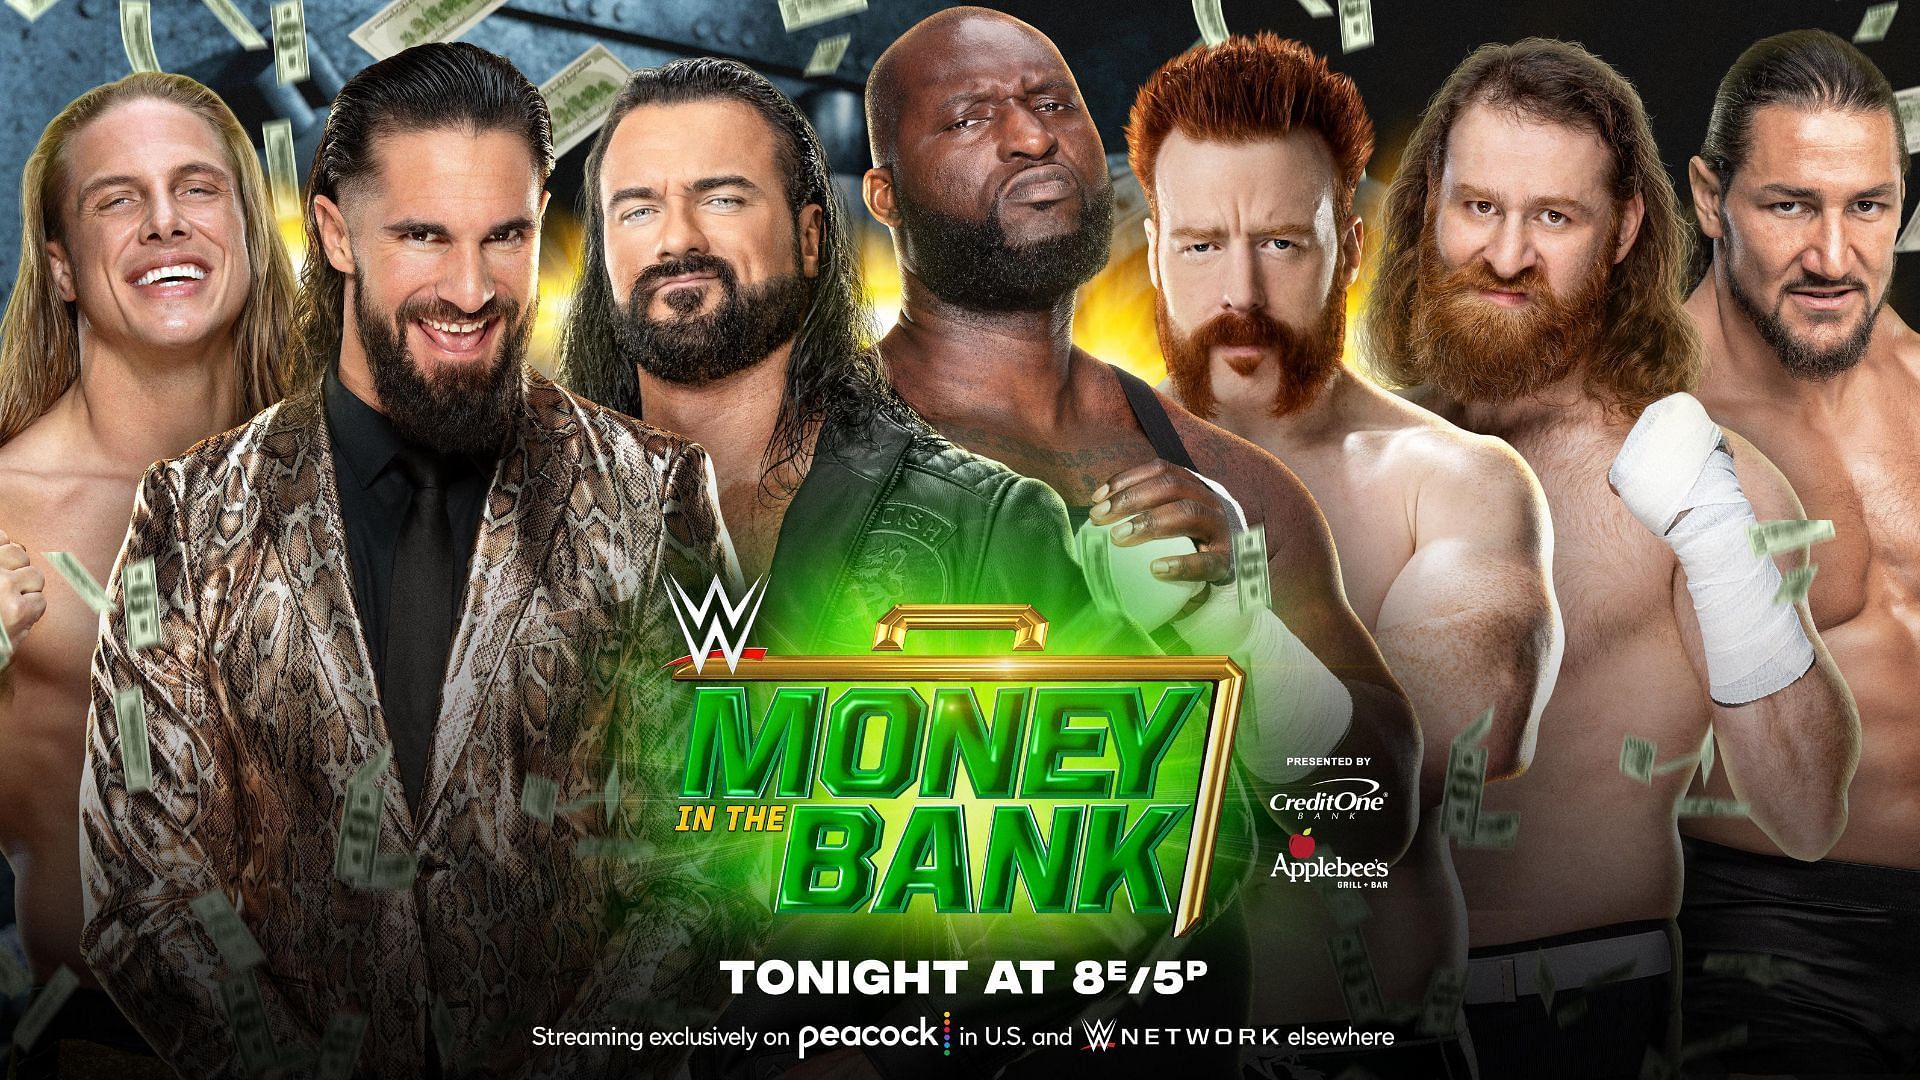 Planned match order for WWE Money in the Bank 2022 seemingly disclosed